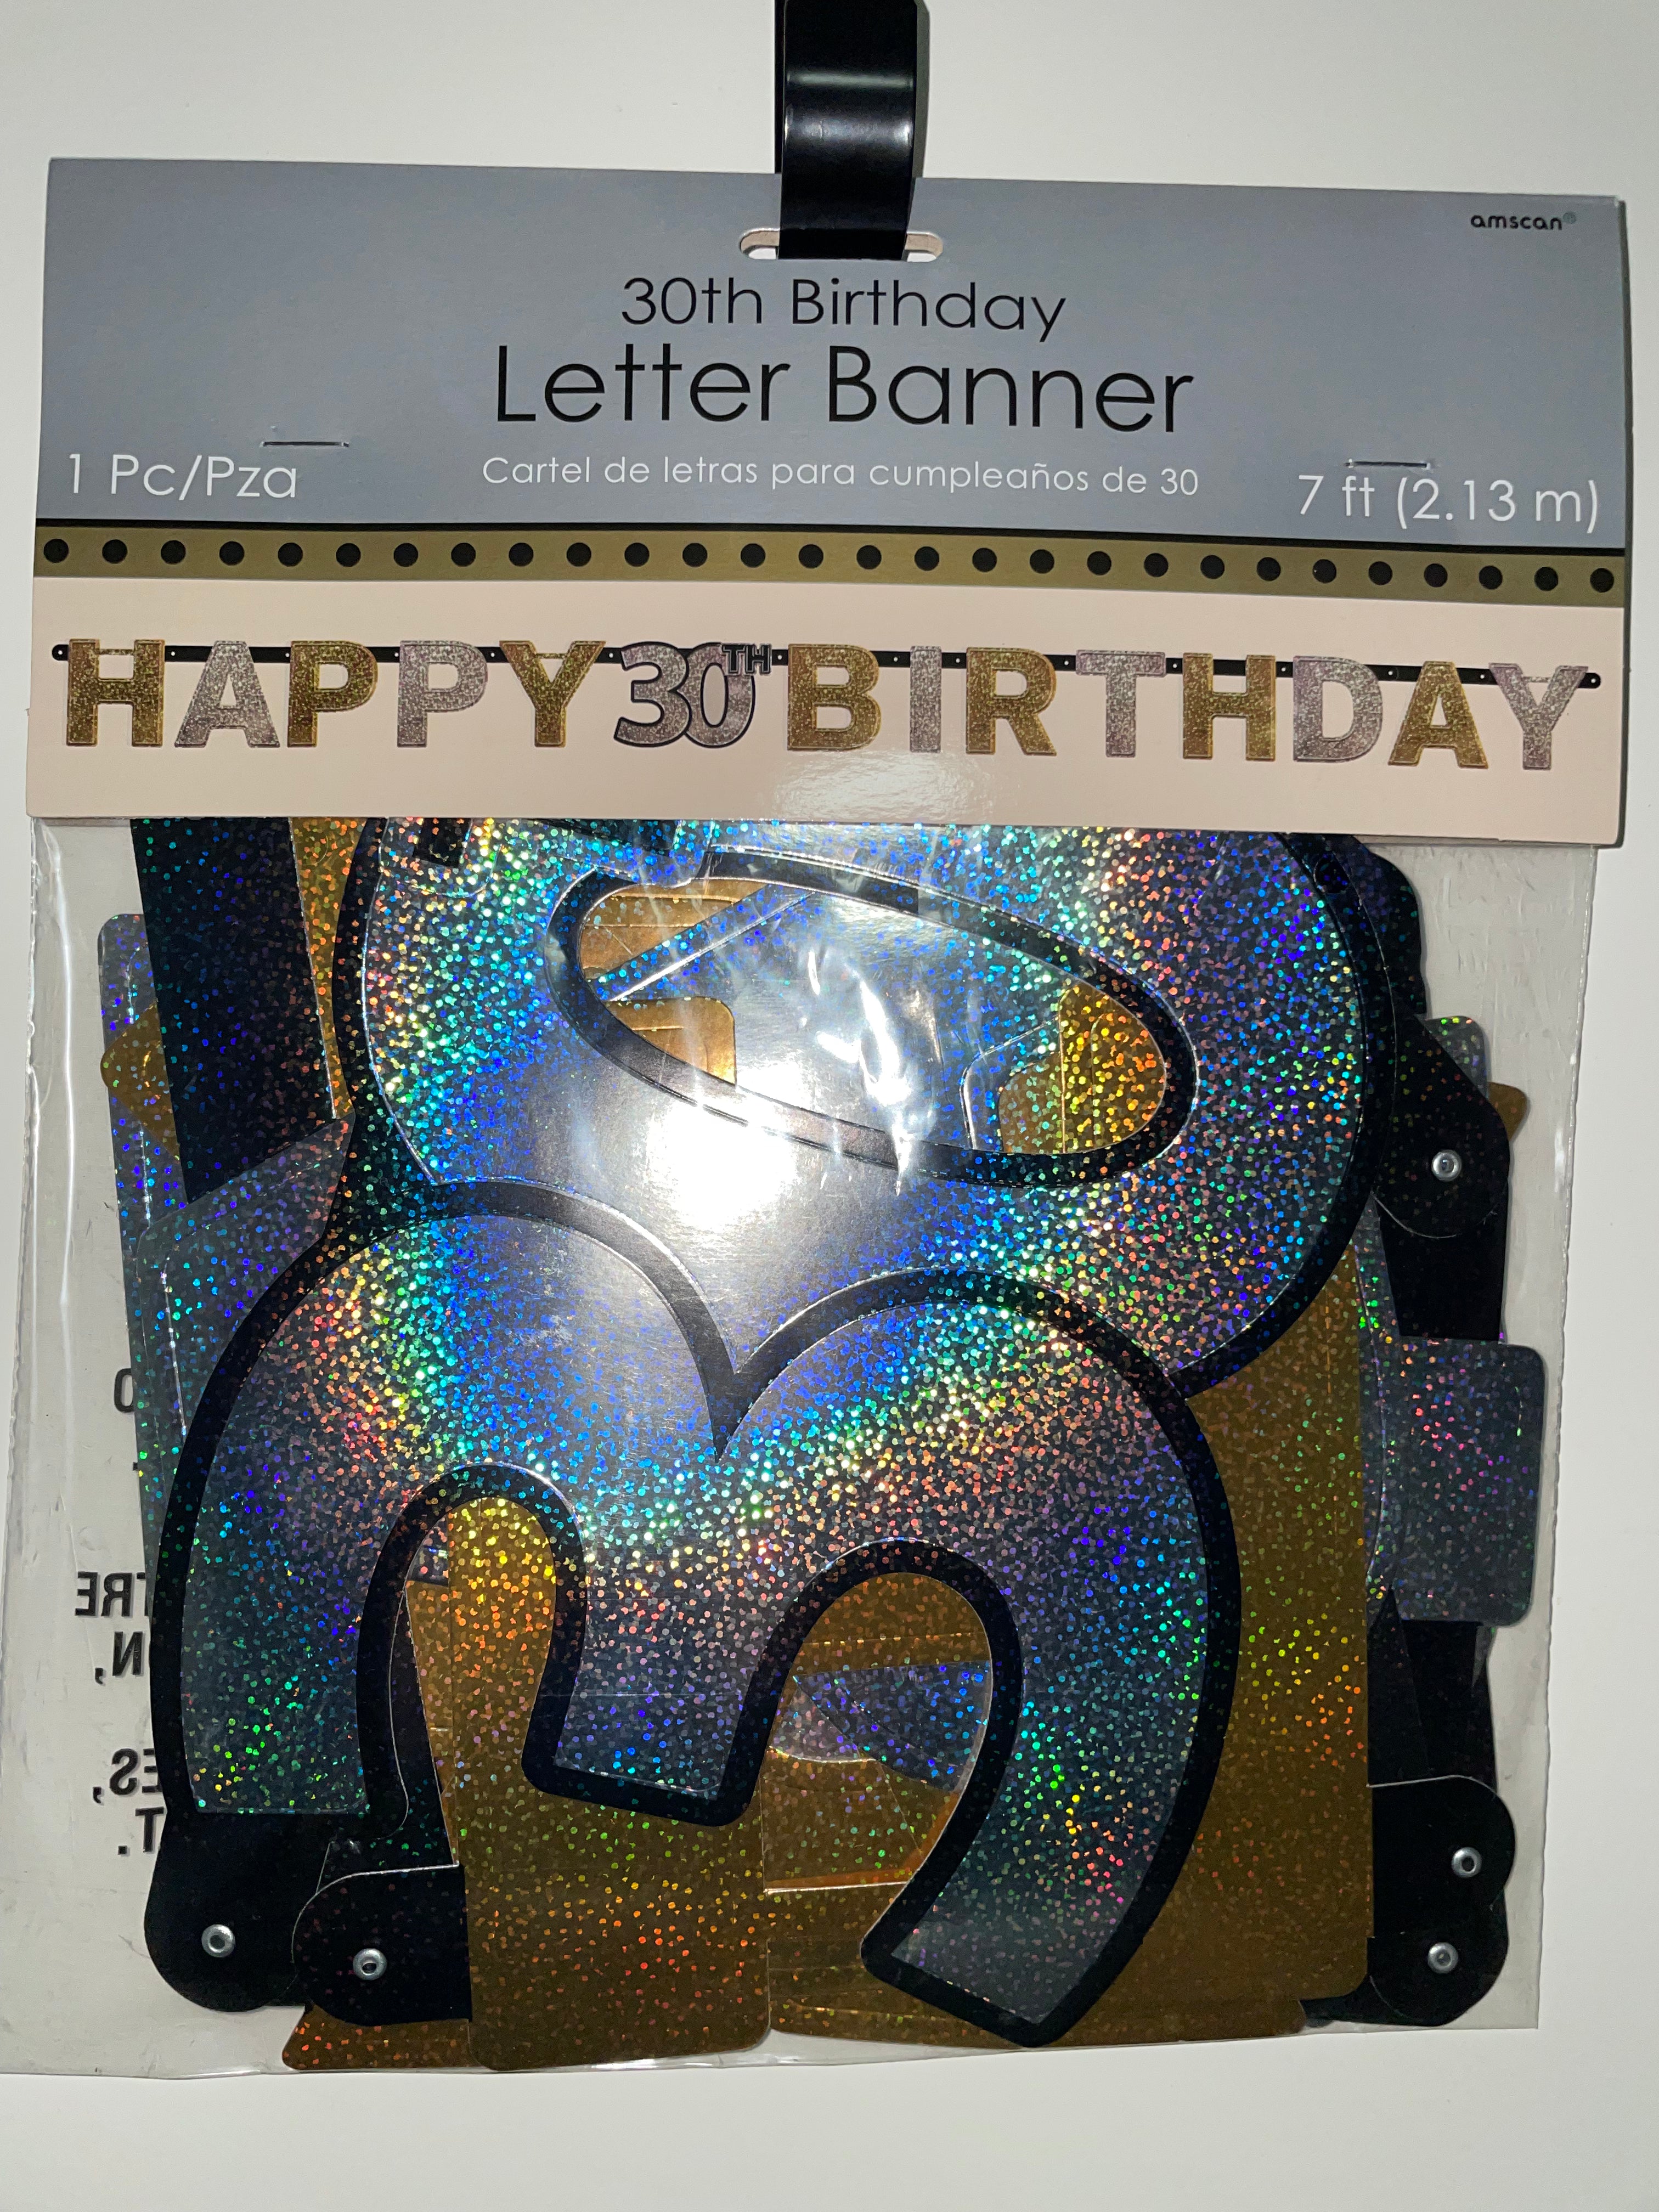 Happy 30th birthday sparkling celebrations- jointed banner in silver, gold and black